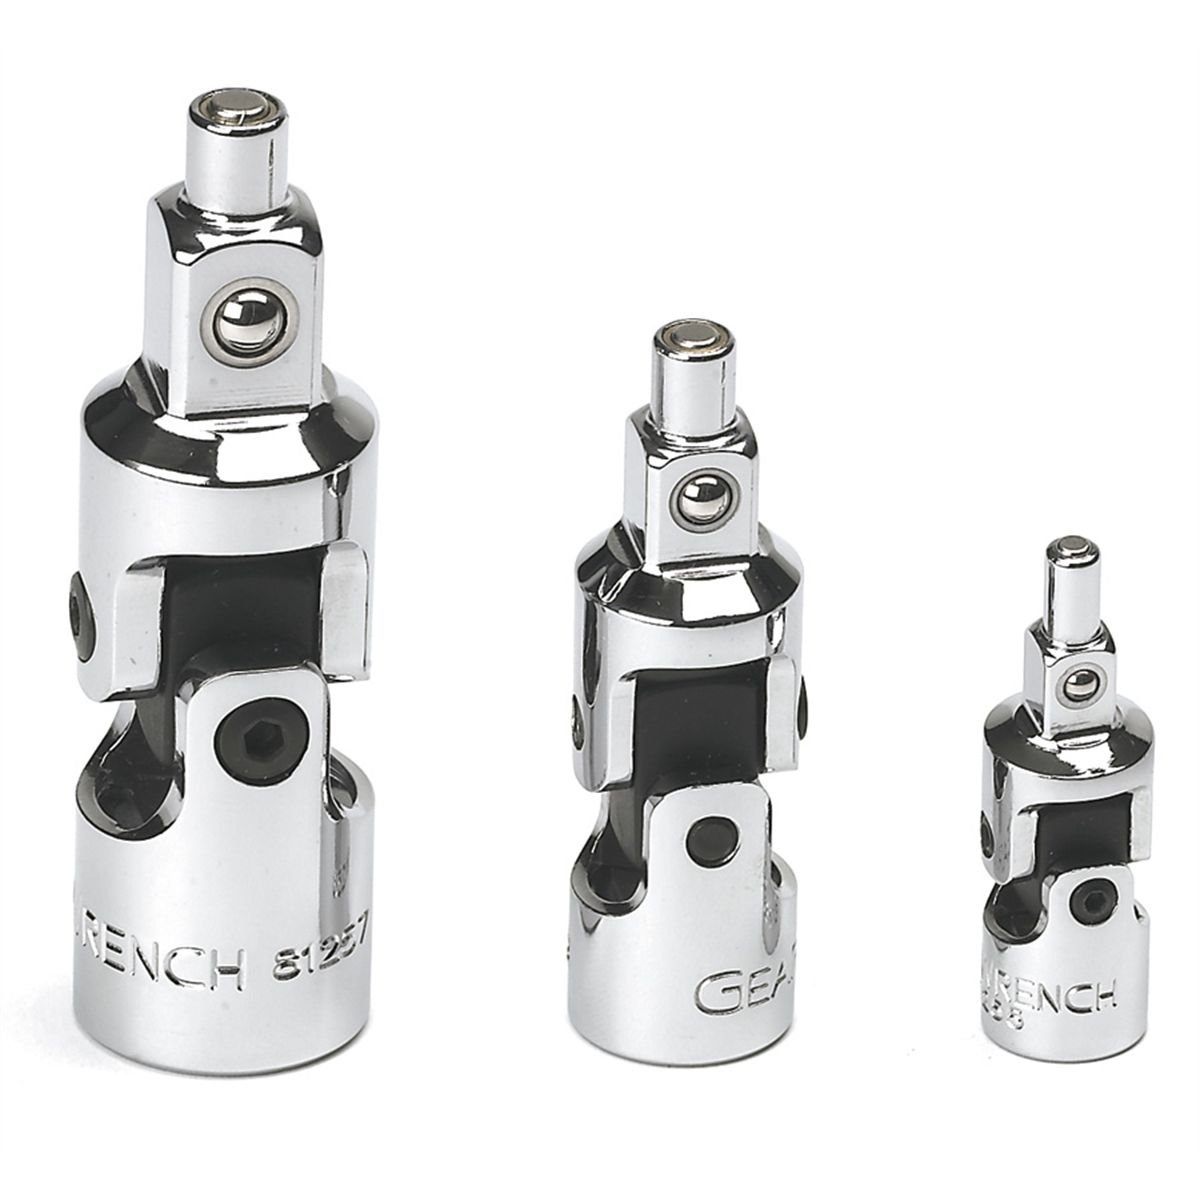 1/4, 3/8 & 1/2 Inch Magnetic Swivel Universal Joint Set Multi Dr